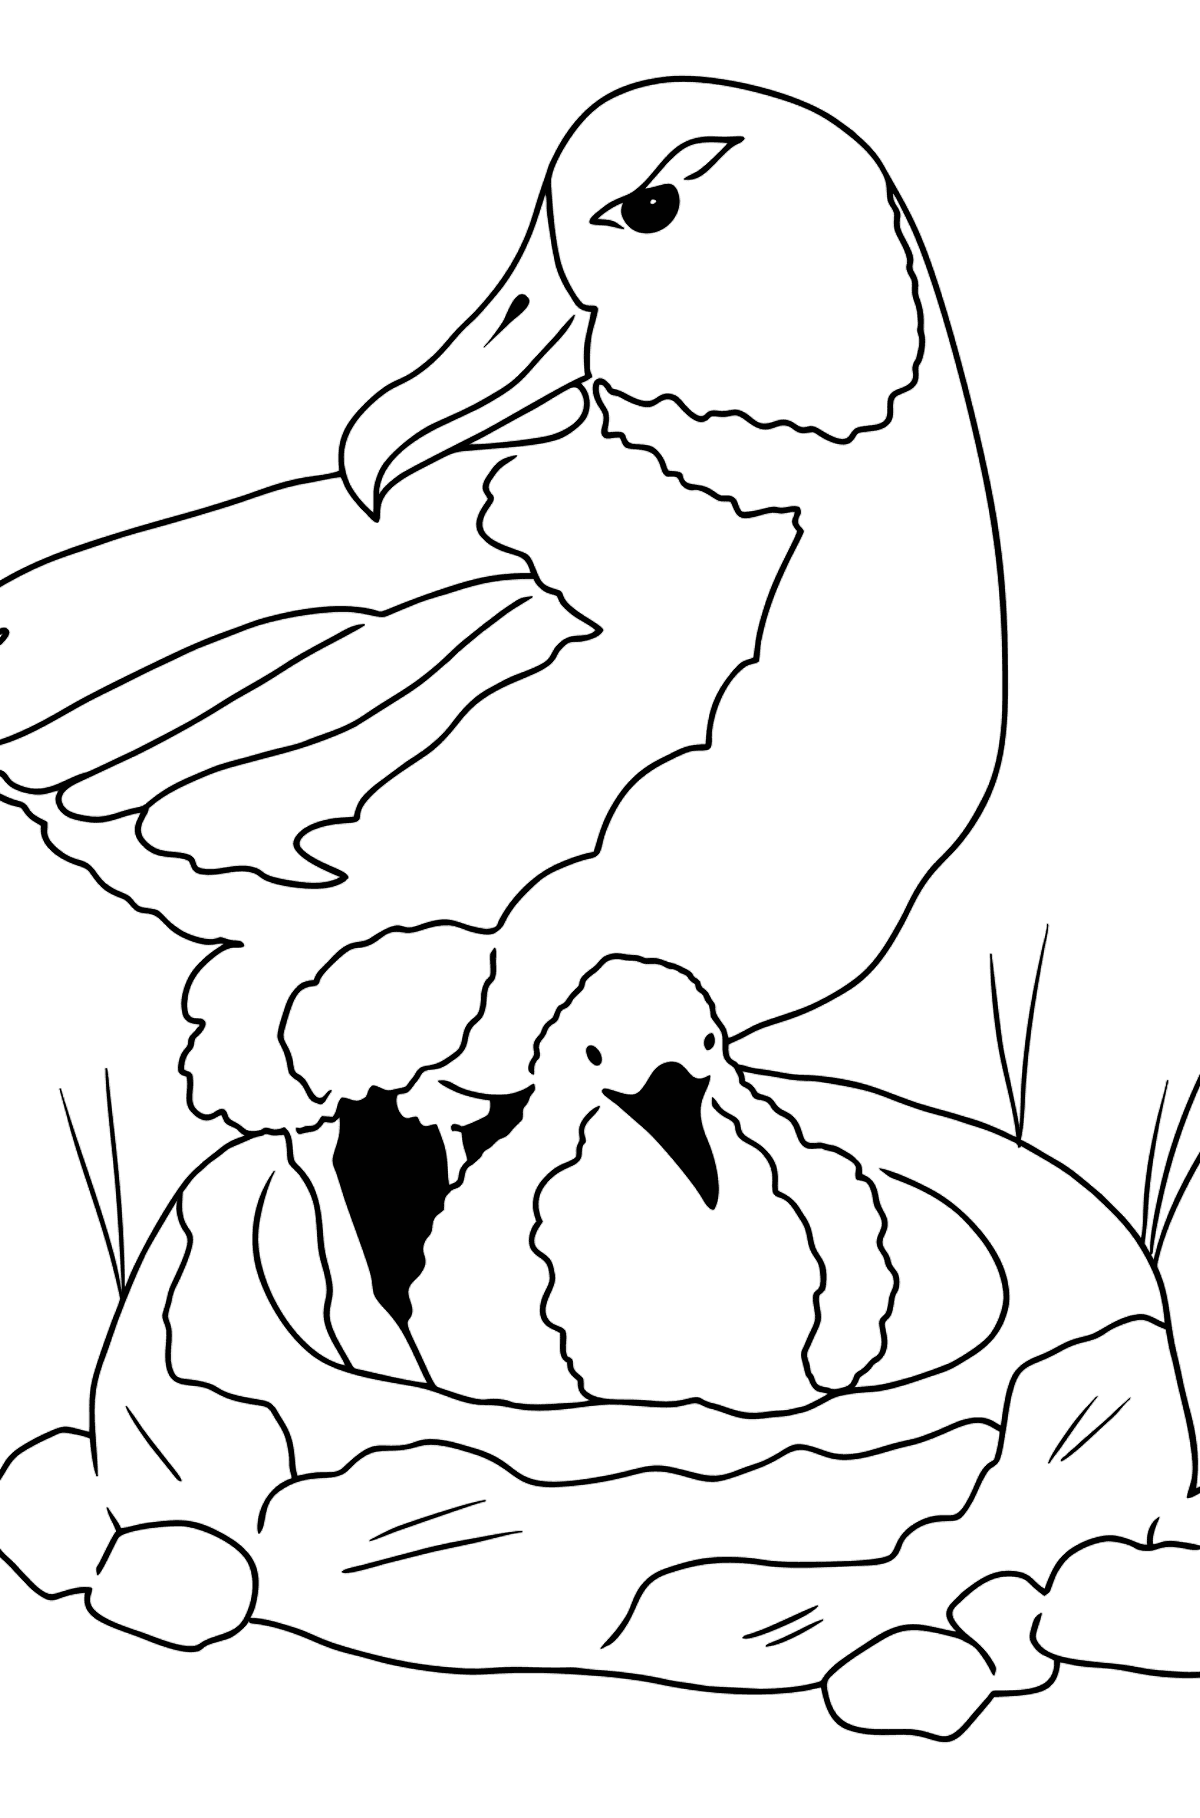 Coloring Page - An Albatross in a Nest - Coloring Pages for Kids